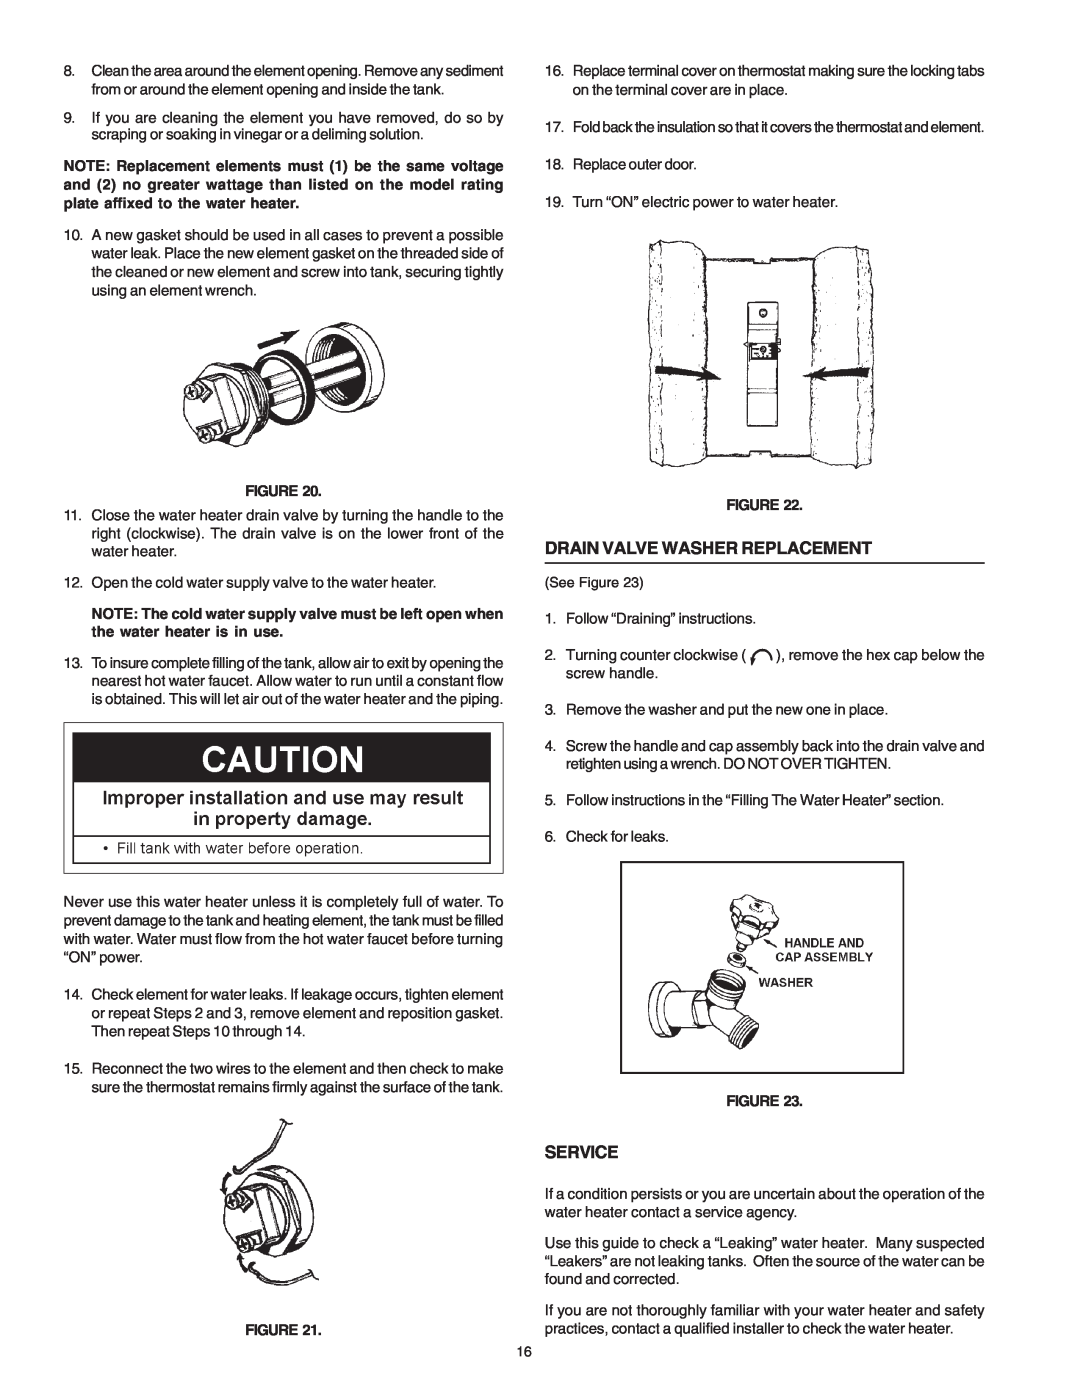 Reliance Water Heaters 184735-000 instruction manual Drain Valve Washer Replacement, Service 